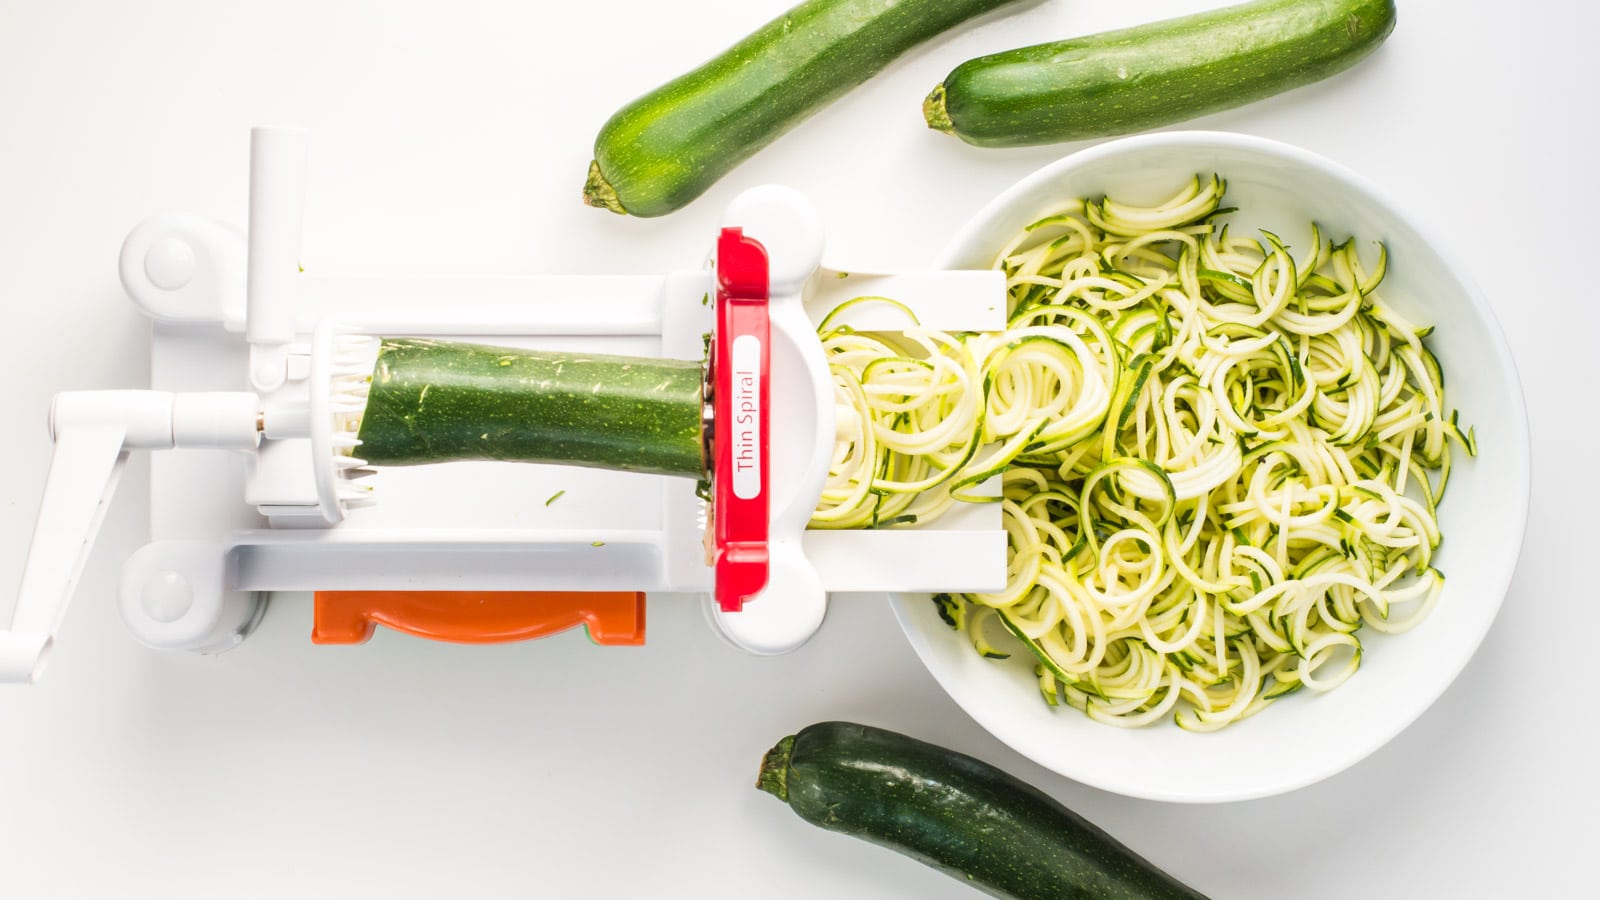 A spiral noodle maker has a zucchini in it and is being used to make zoodles (zucchini noodles). There are 3 whole zucchinis next to the tool.